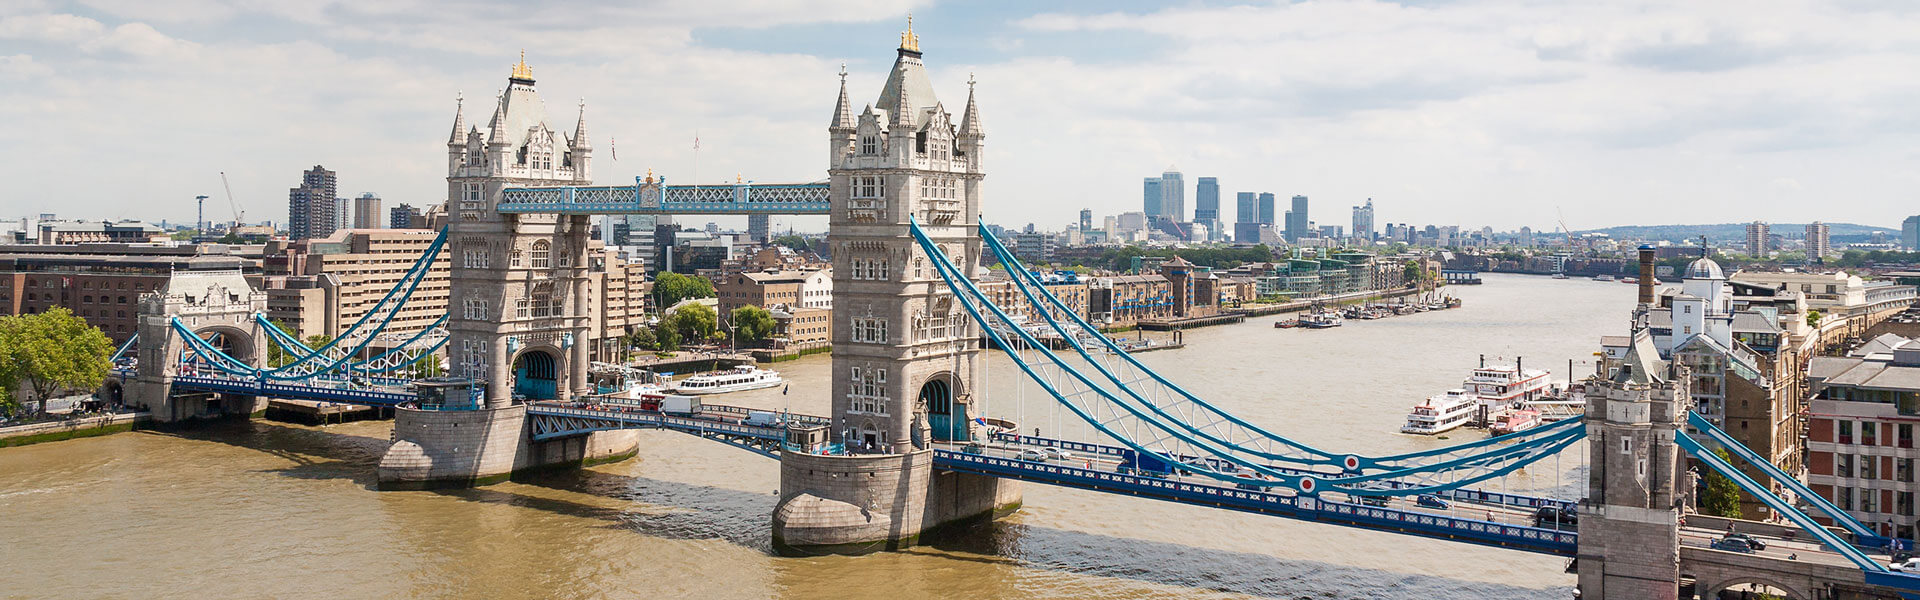 See the most famous bridge London on a city trip